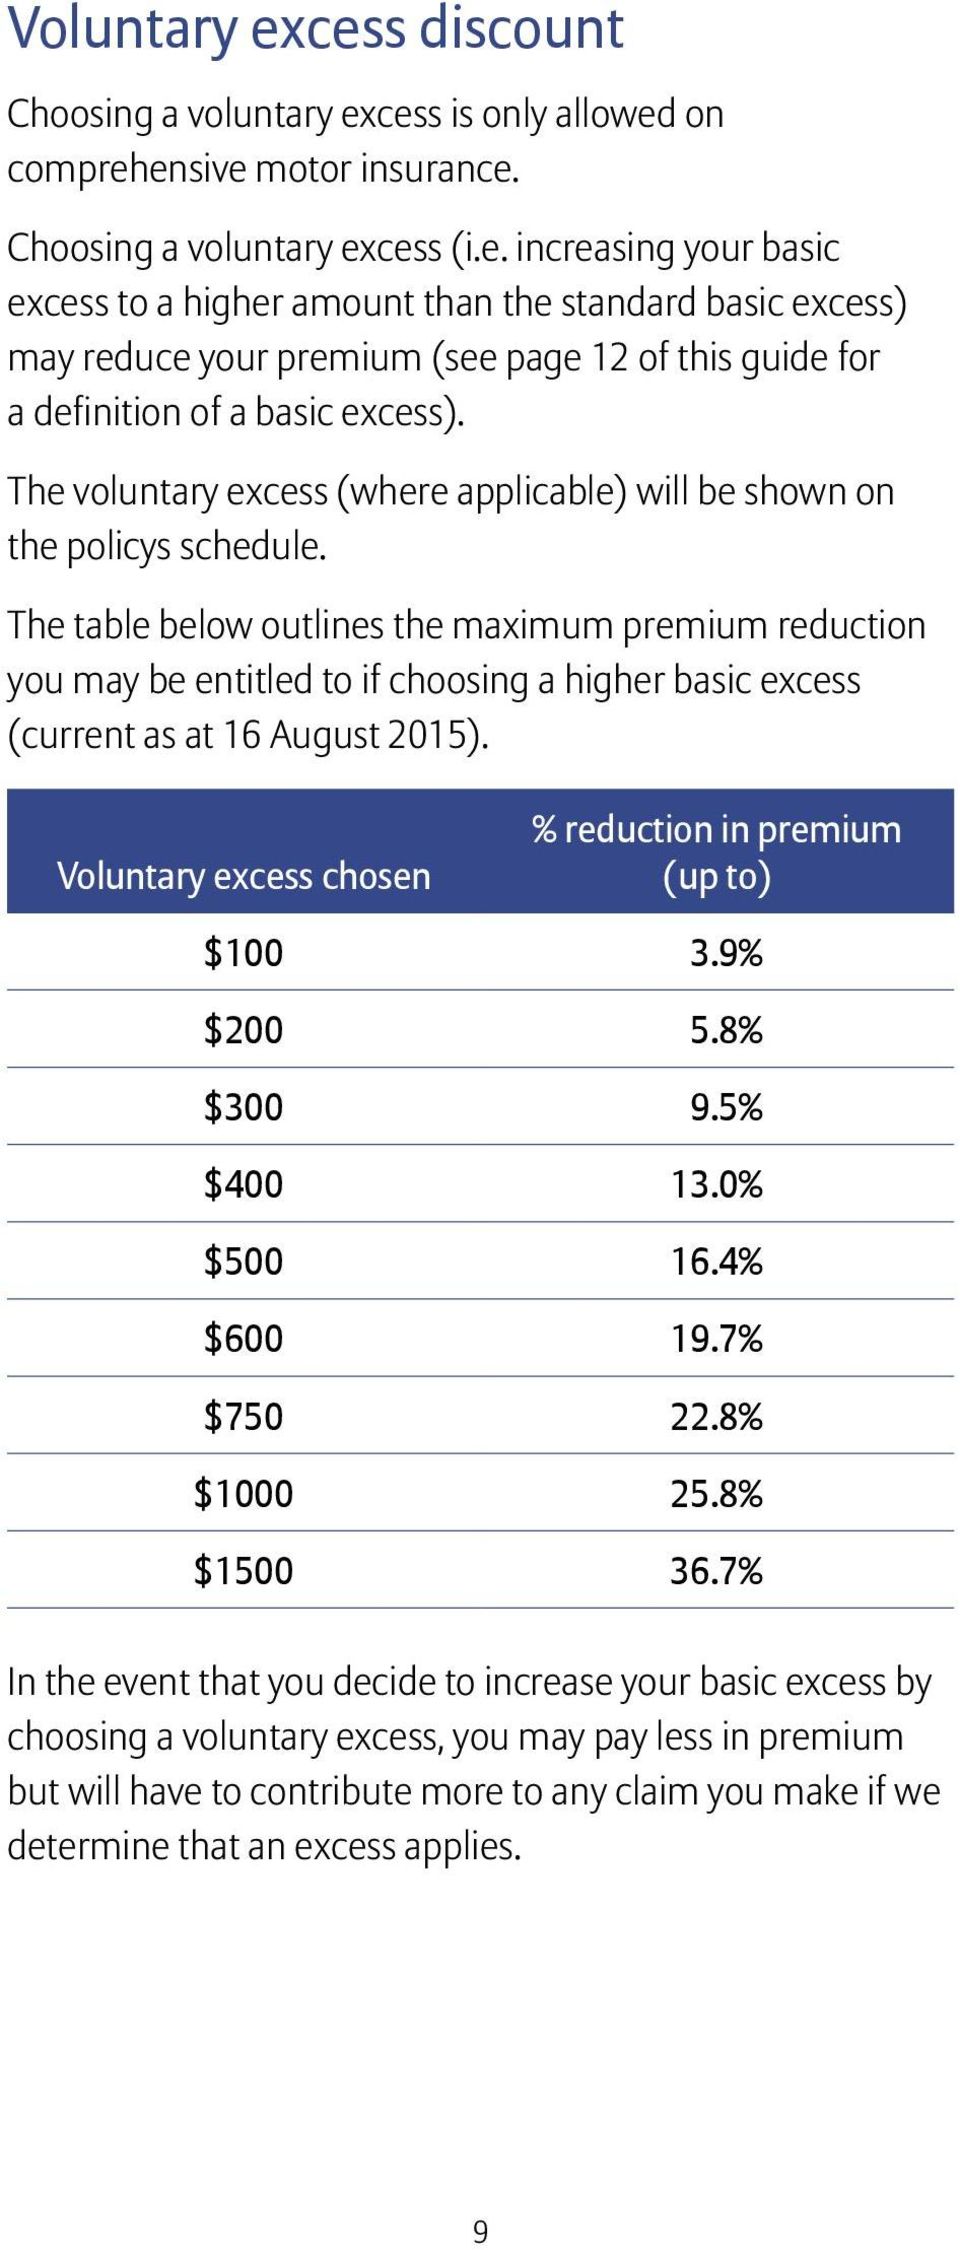 The table below outlines the maximum premium reduction you may be entitled to if choosing a higher basic excess (current as at 16 August 2015).